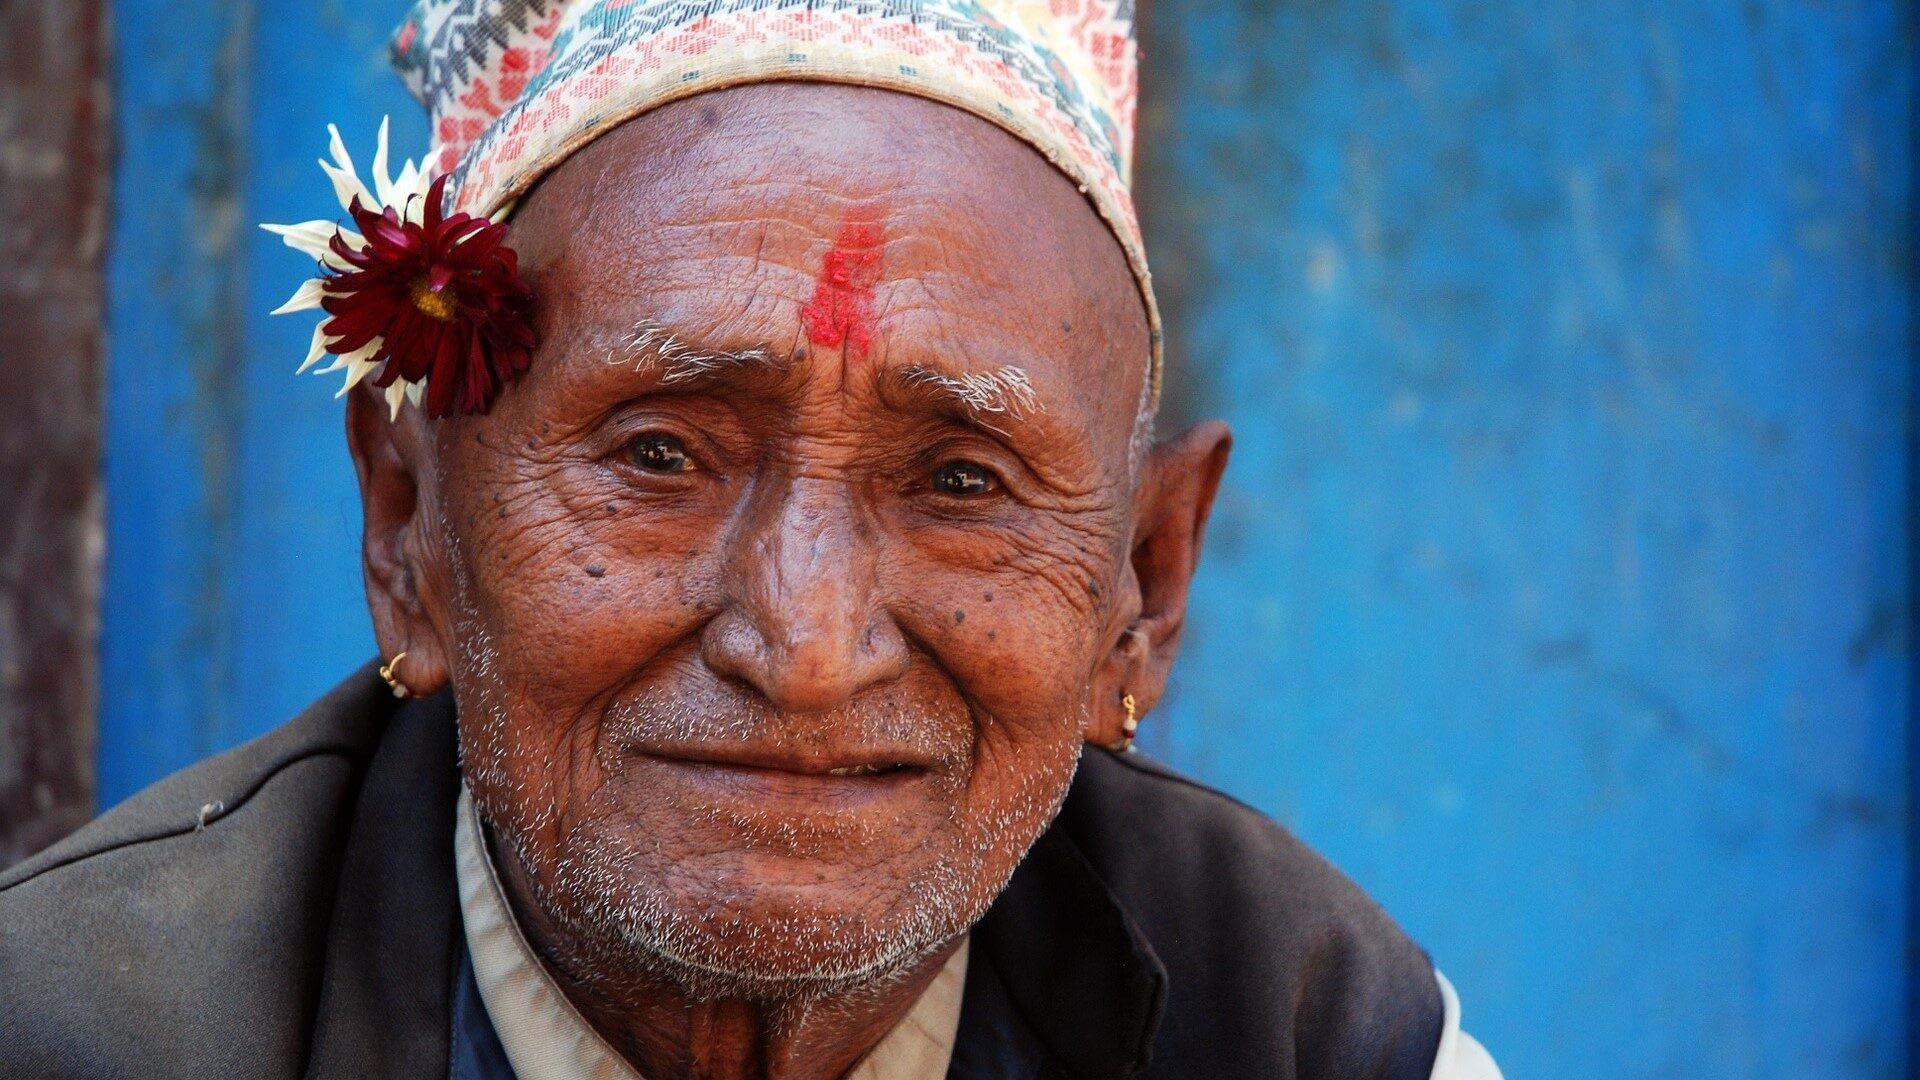 Image: Elderly man with a flower tucked behind his ear